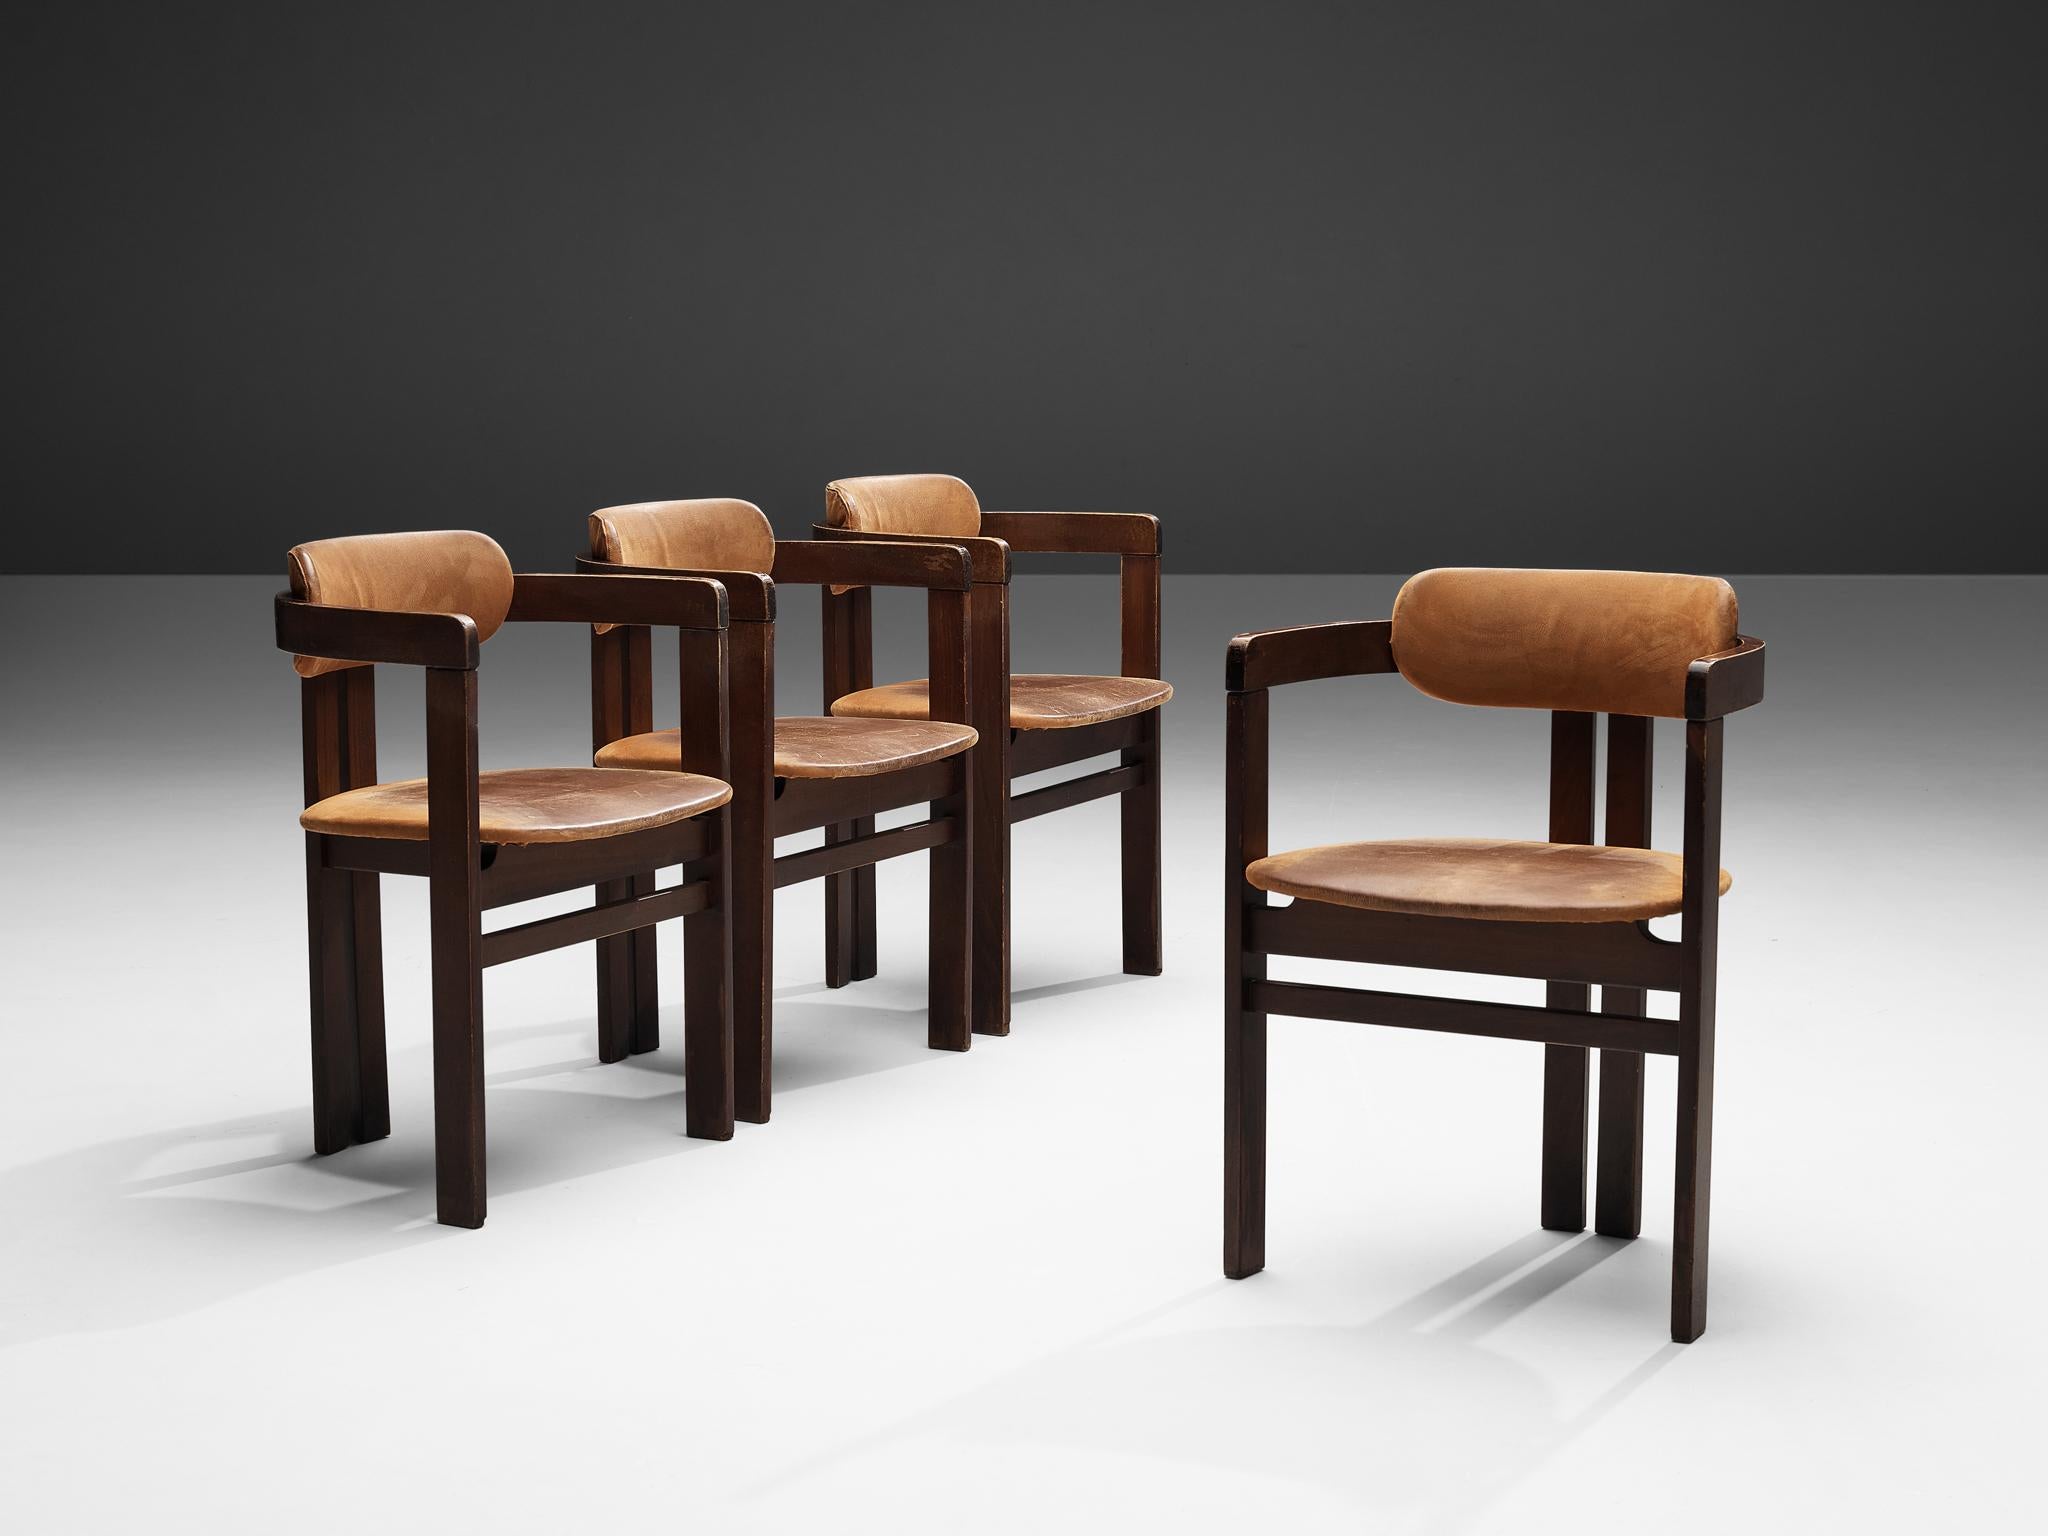 Armchairs, leather, lacquered wood, Italy, 1960s

Armchairs in wood with cognac leather. The chairs have a characteristic design, clearly inspired by the Pamplona chair of Augusto Savini. The chairs are functional and straightforward, yet very